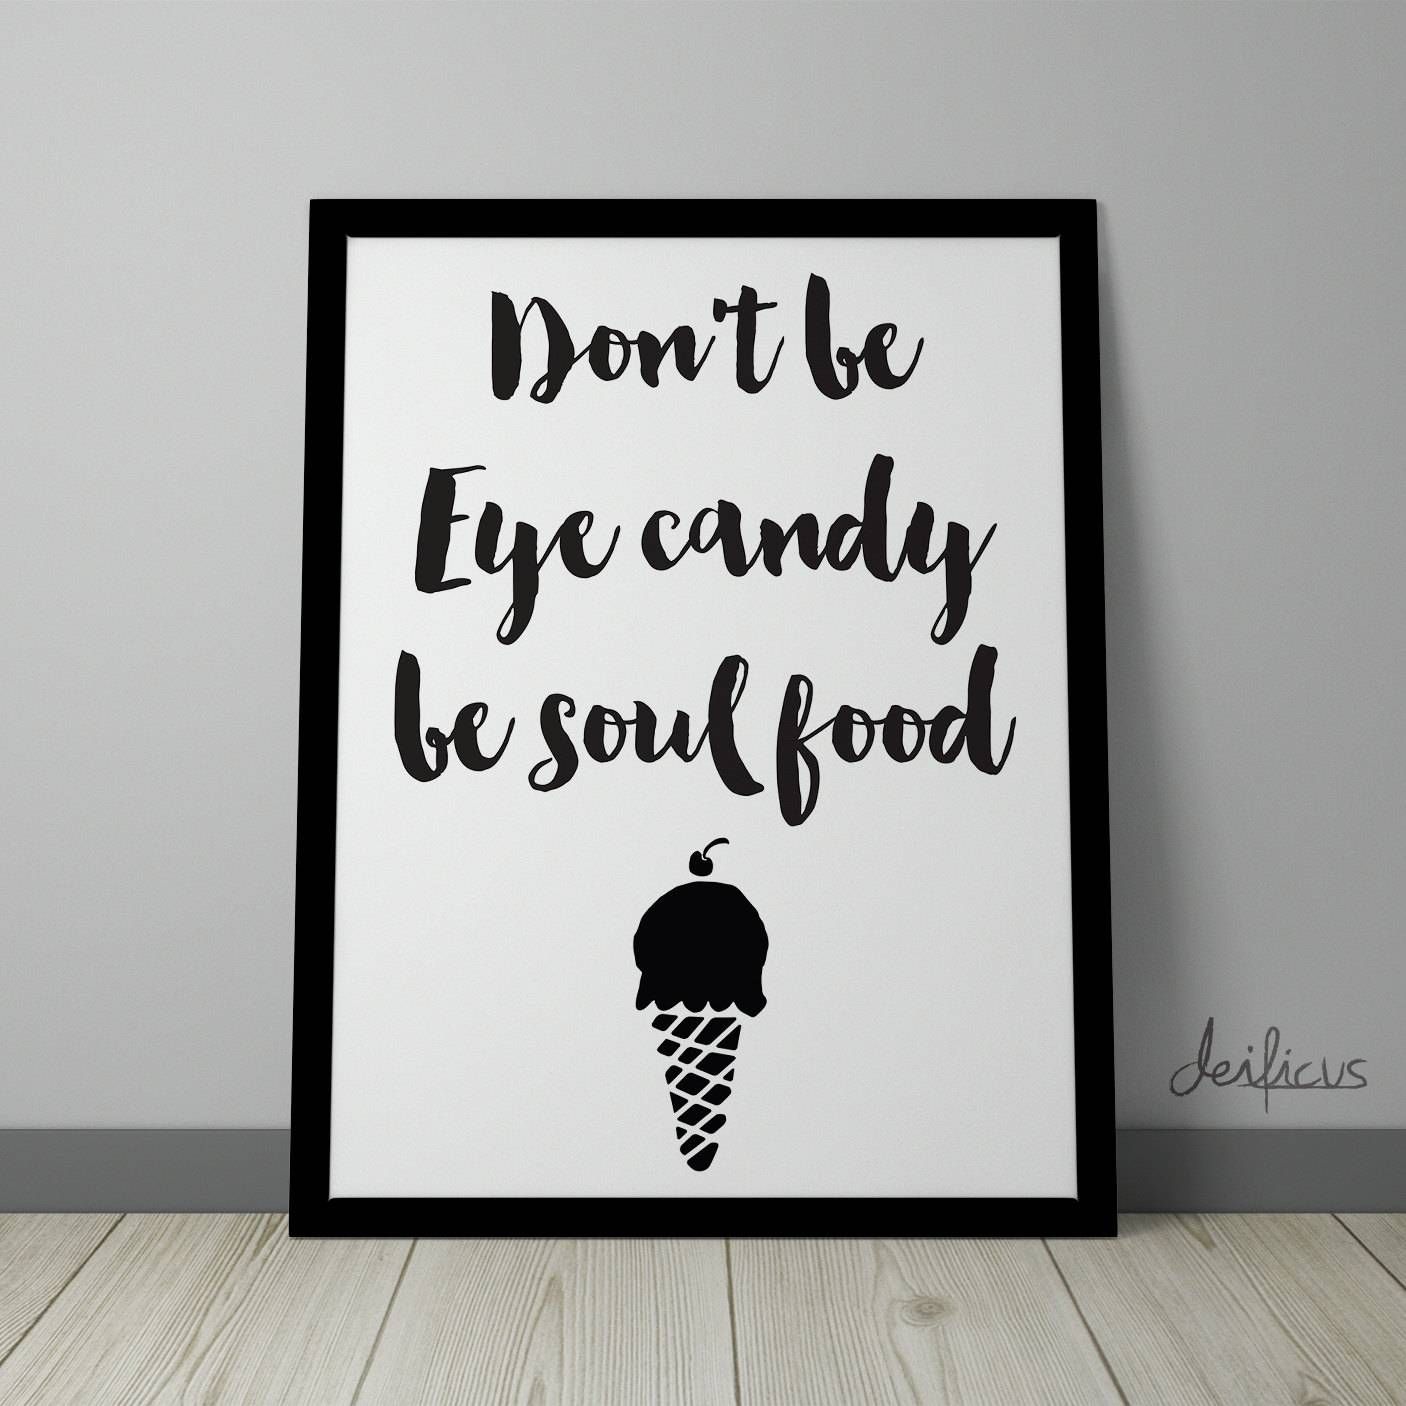 Don't Be Eye Candy Be Soul Food Digital Art Print Within Latest Art Prints To Hang On Your Wall (Gallery 1 of 15)